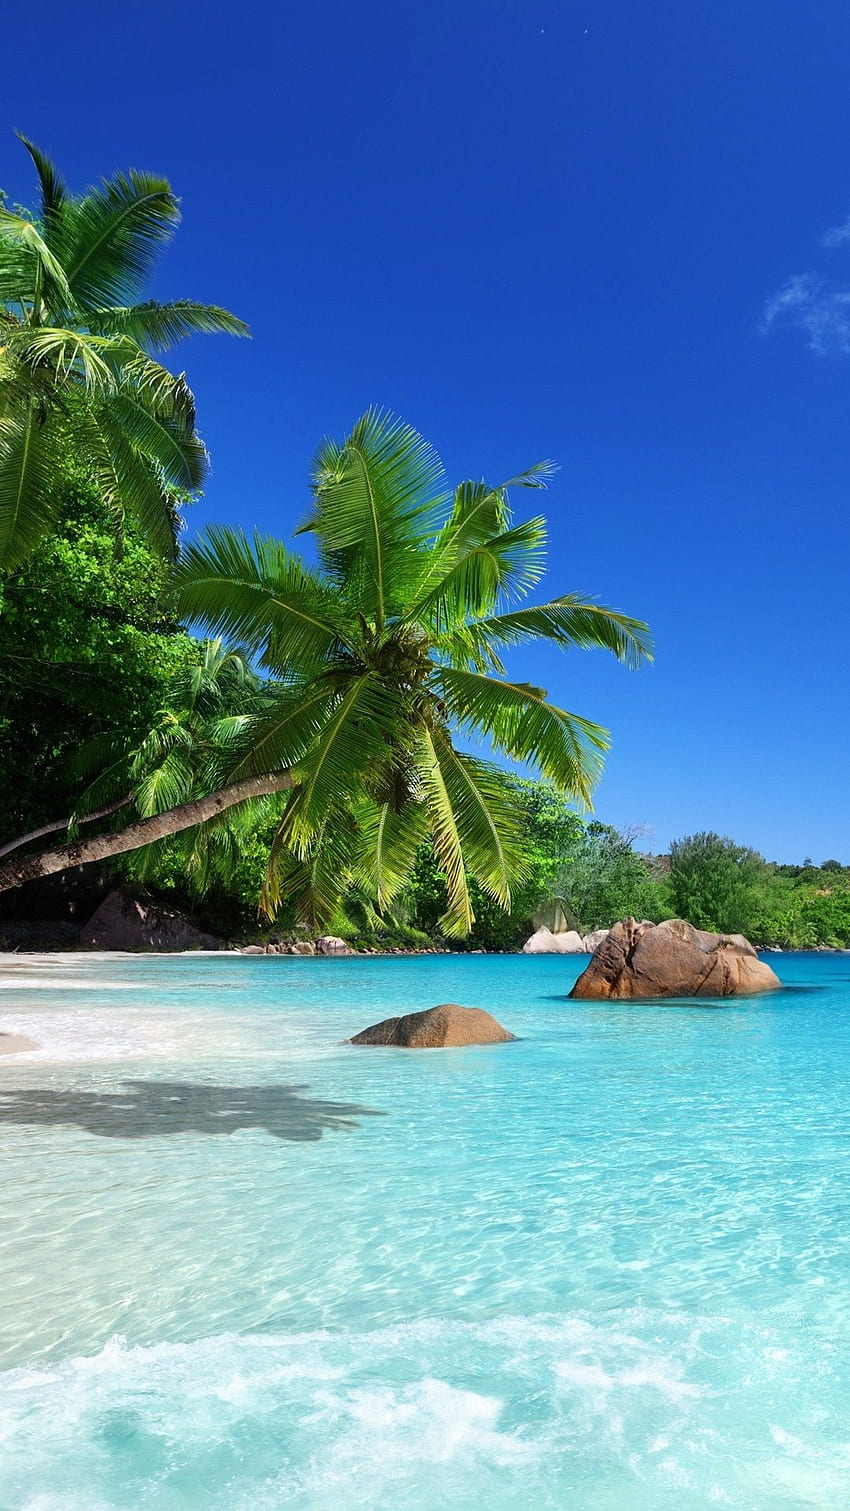 Tropical Island Photos Download The BEST Free Tropical Island Stock Photos   HD Images